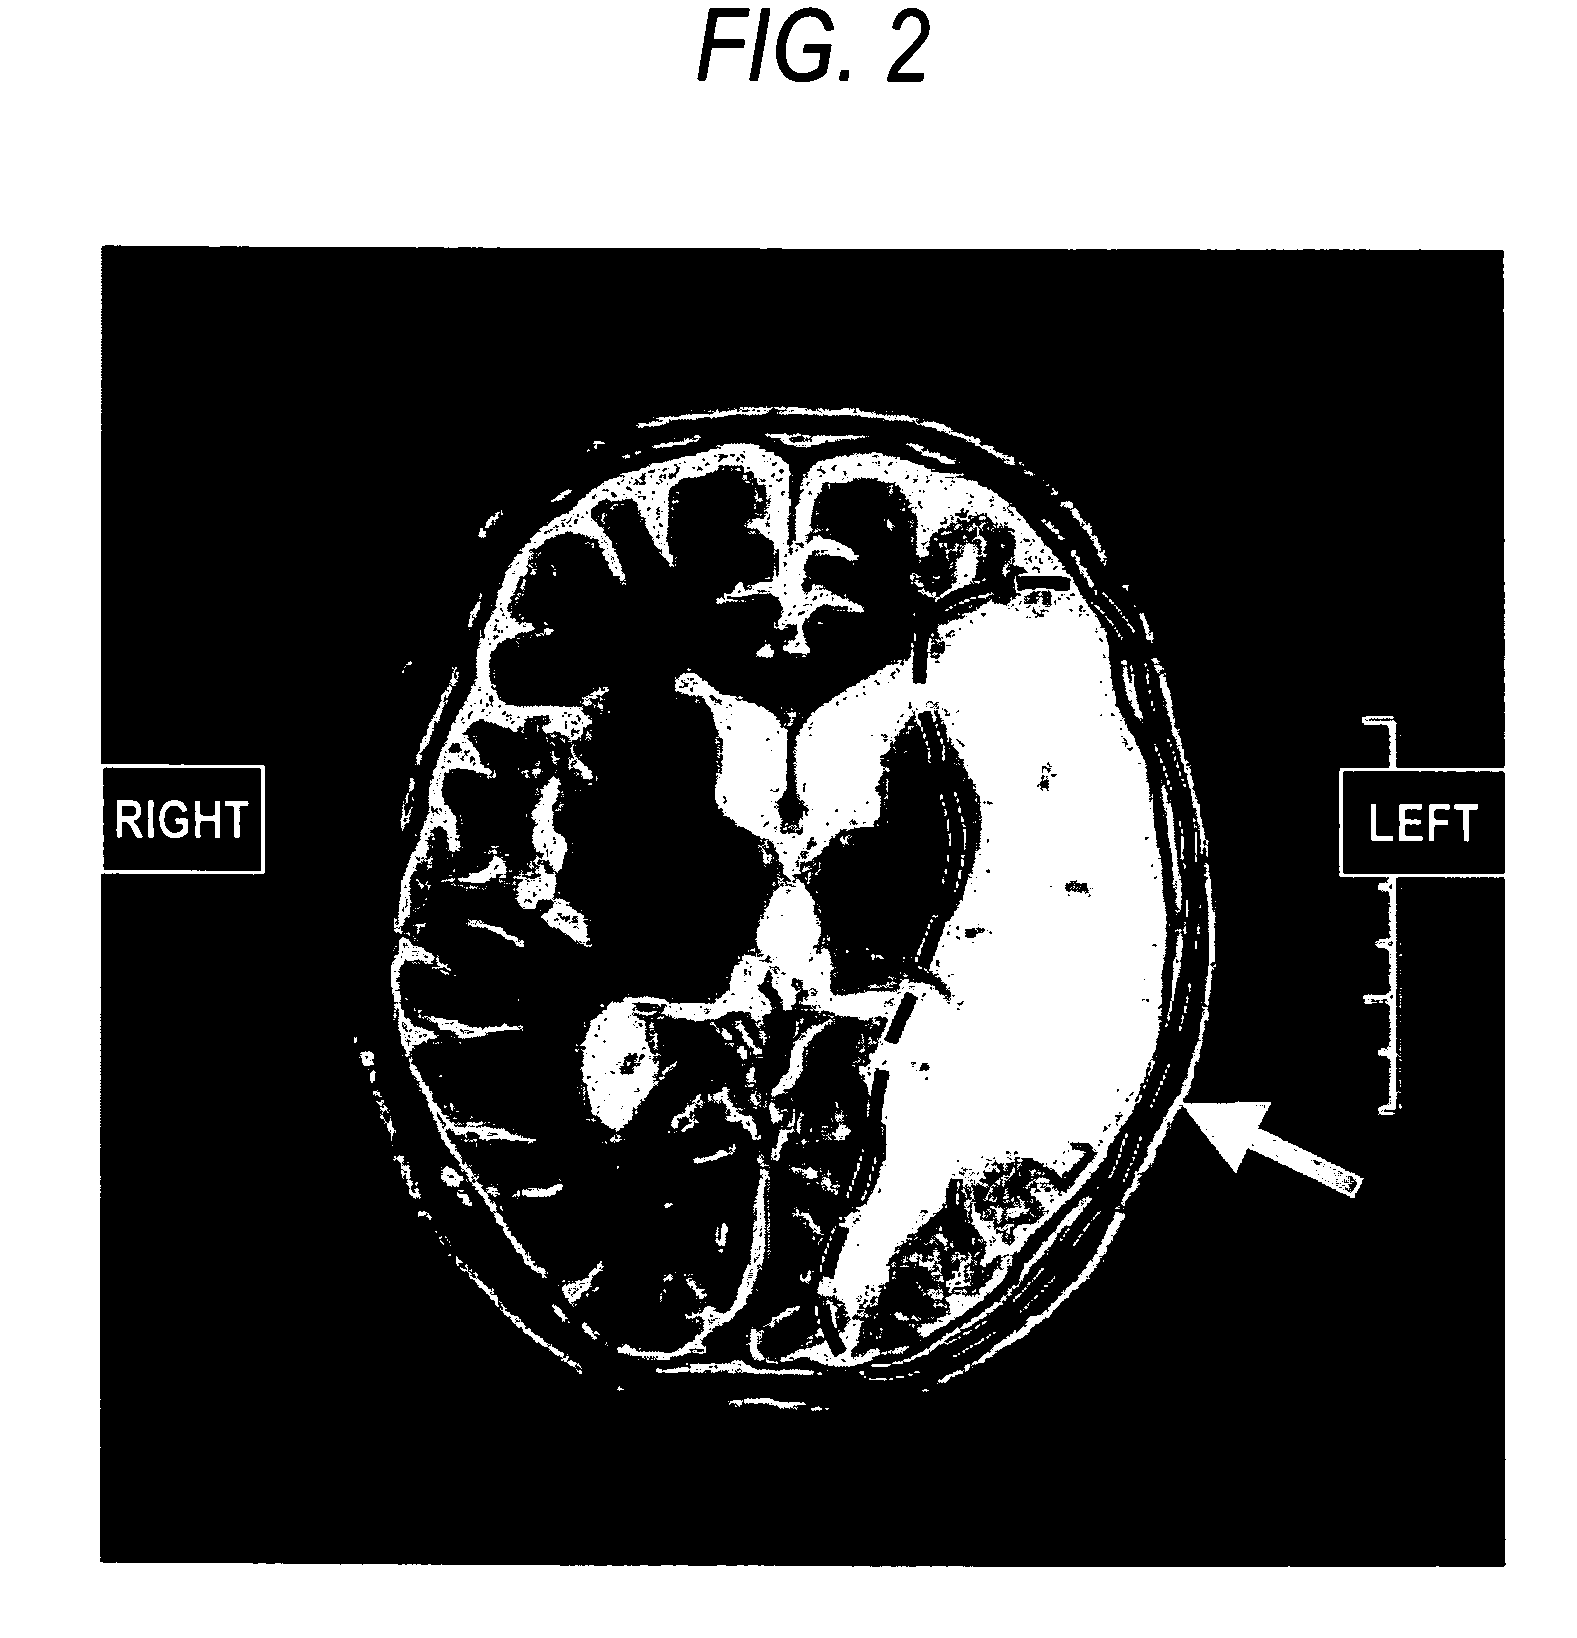 Agent or method for treating severe aphasia in cerebrovascular accident chronic stage